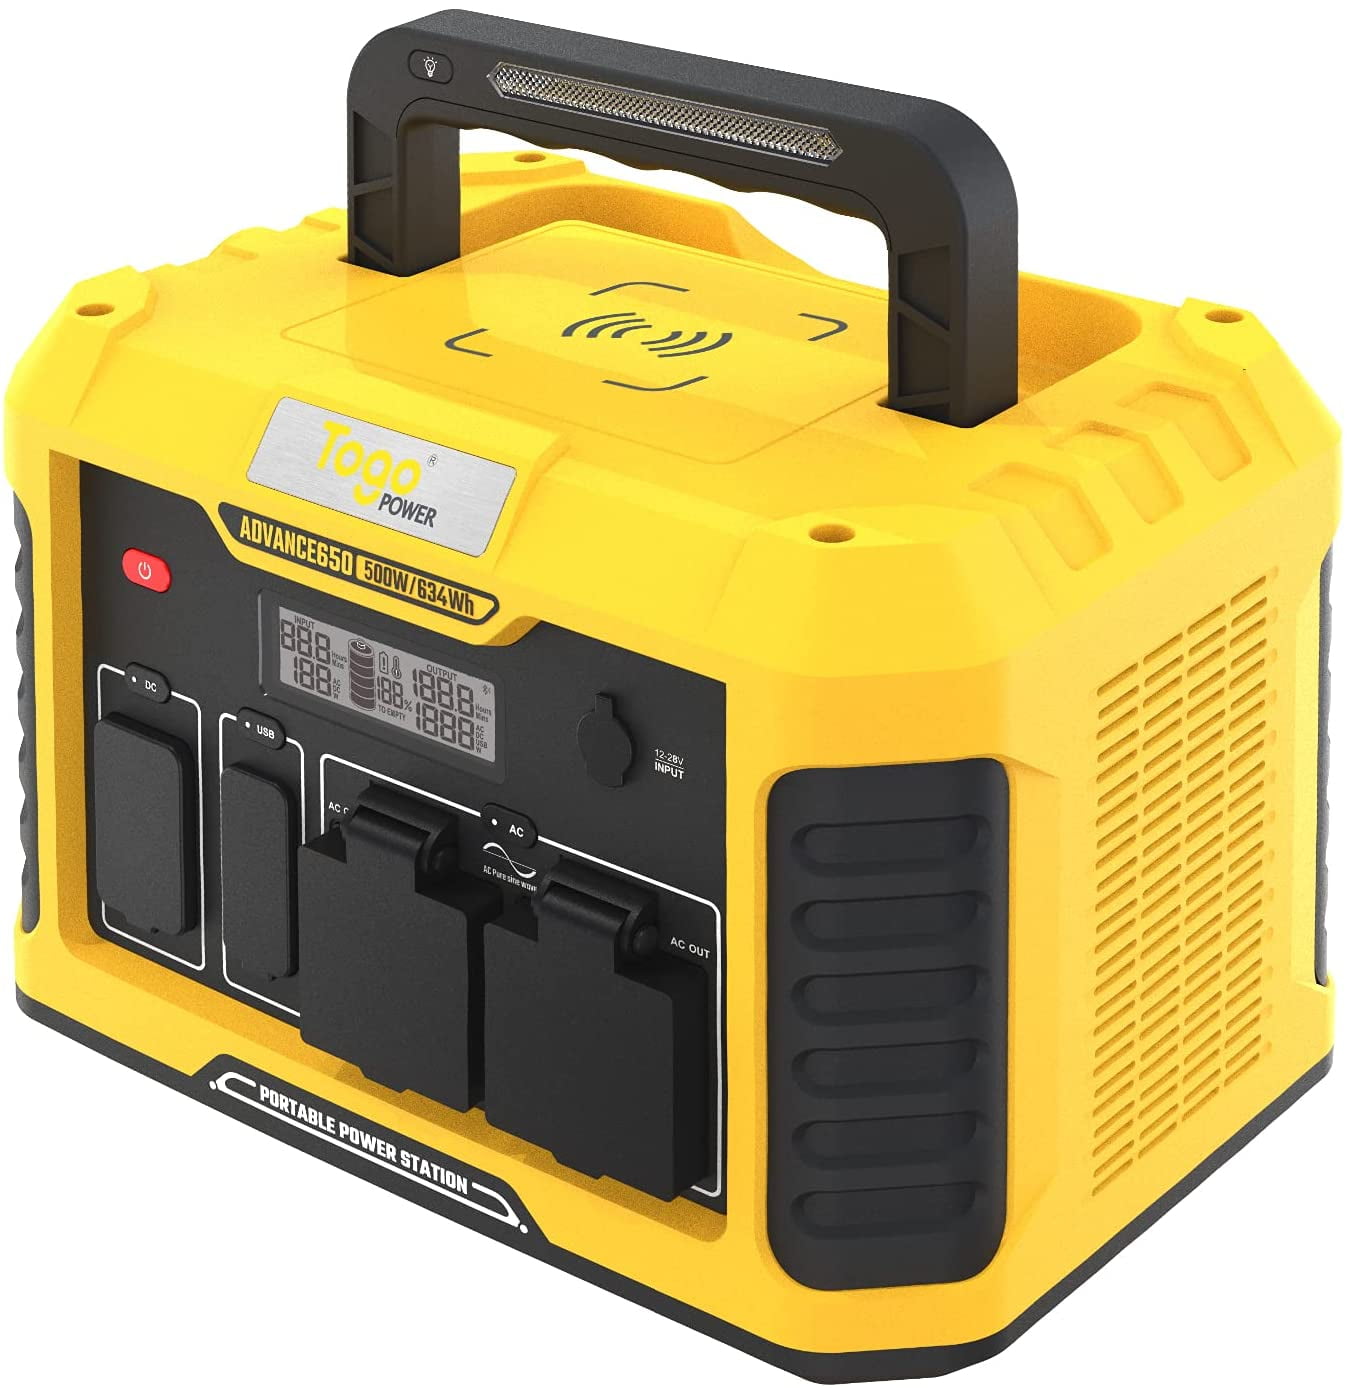 Togo Power Togo Power Pioneer 330, 288WH Portable Power Station Lithium  Battery 330W (660W Peak) for Hiking, Camping, Home Emergency, Tailgating,  Hobb